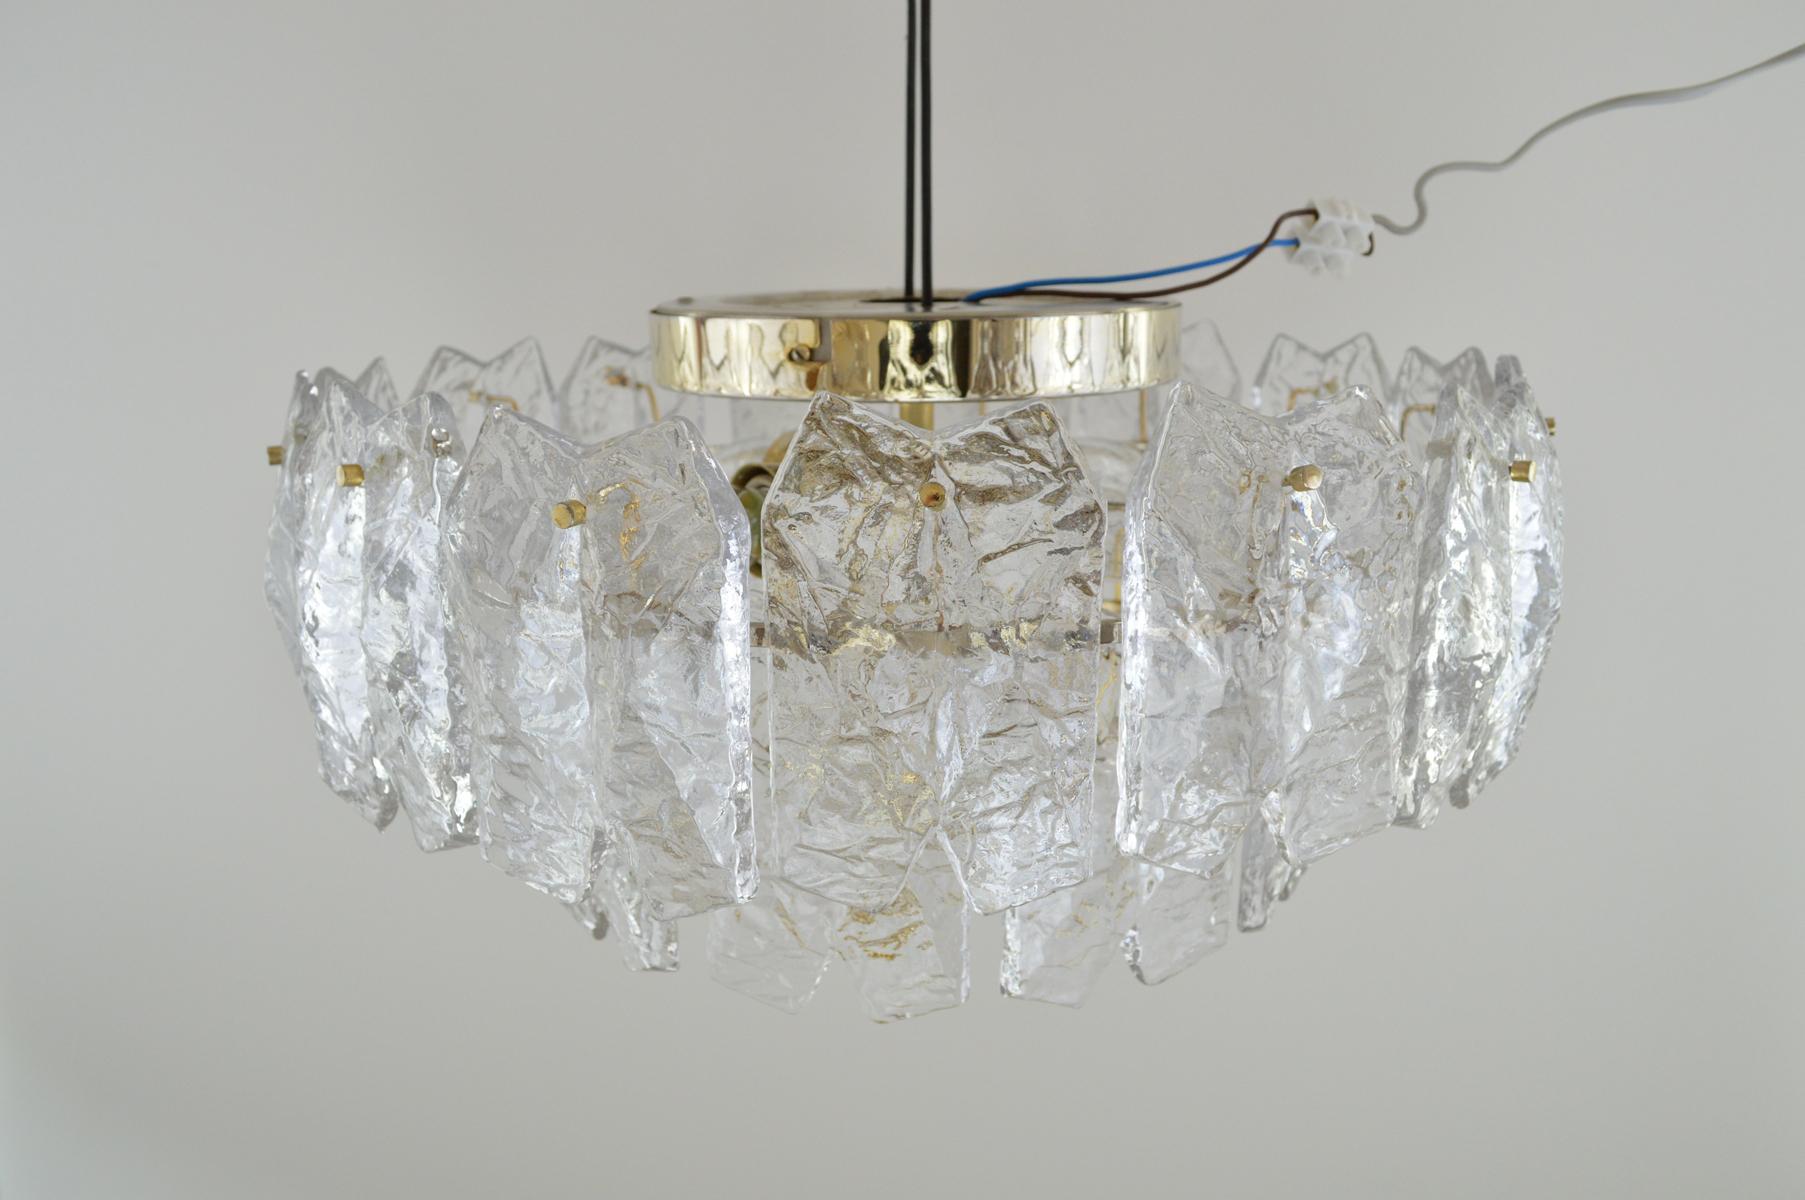 A gilt brass and ice glass brutalist palazzo flush lighting fixture by Julius Kalmar, Vienna, circa 1970.

25 ice glass cut faceted crystals in a two tier configuration.

Presented in very good condition commensurate of age. All glass is in